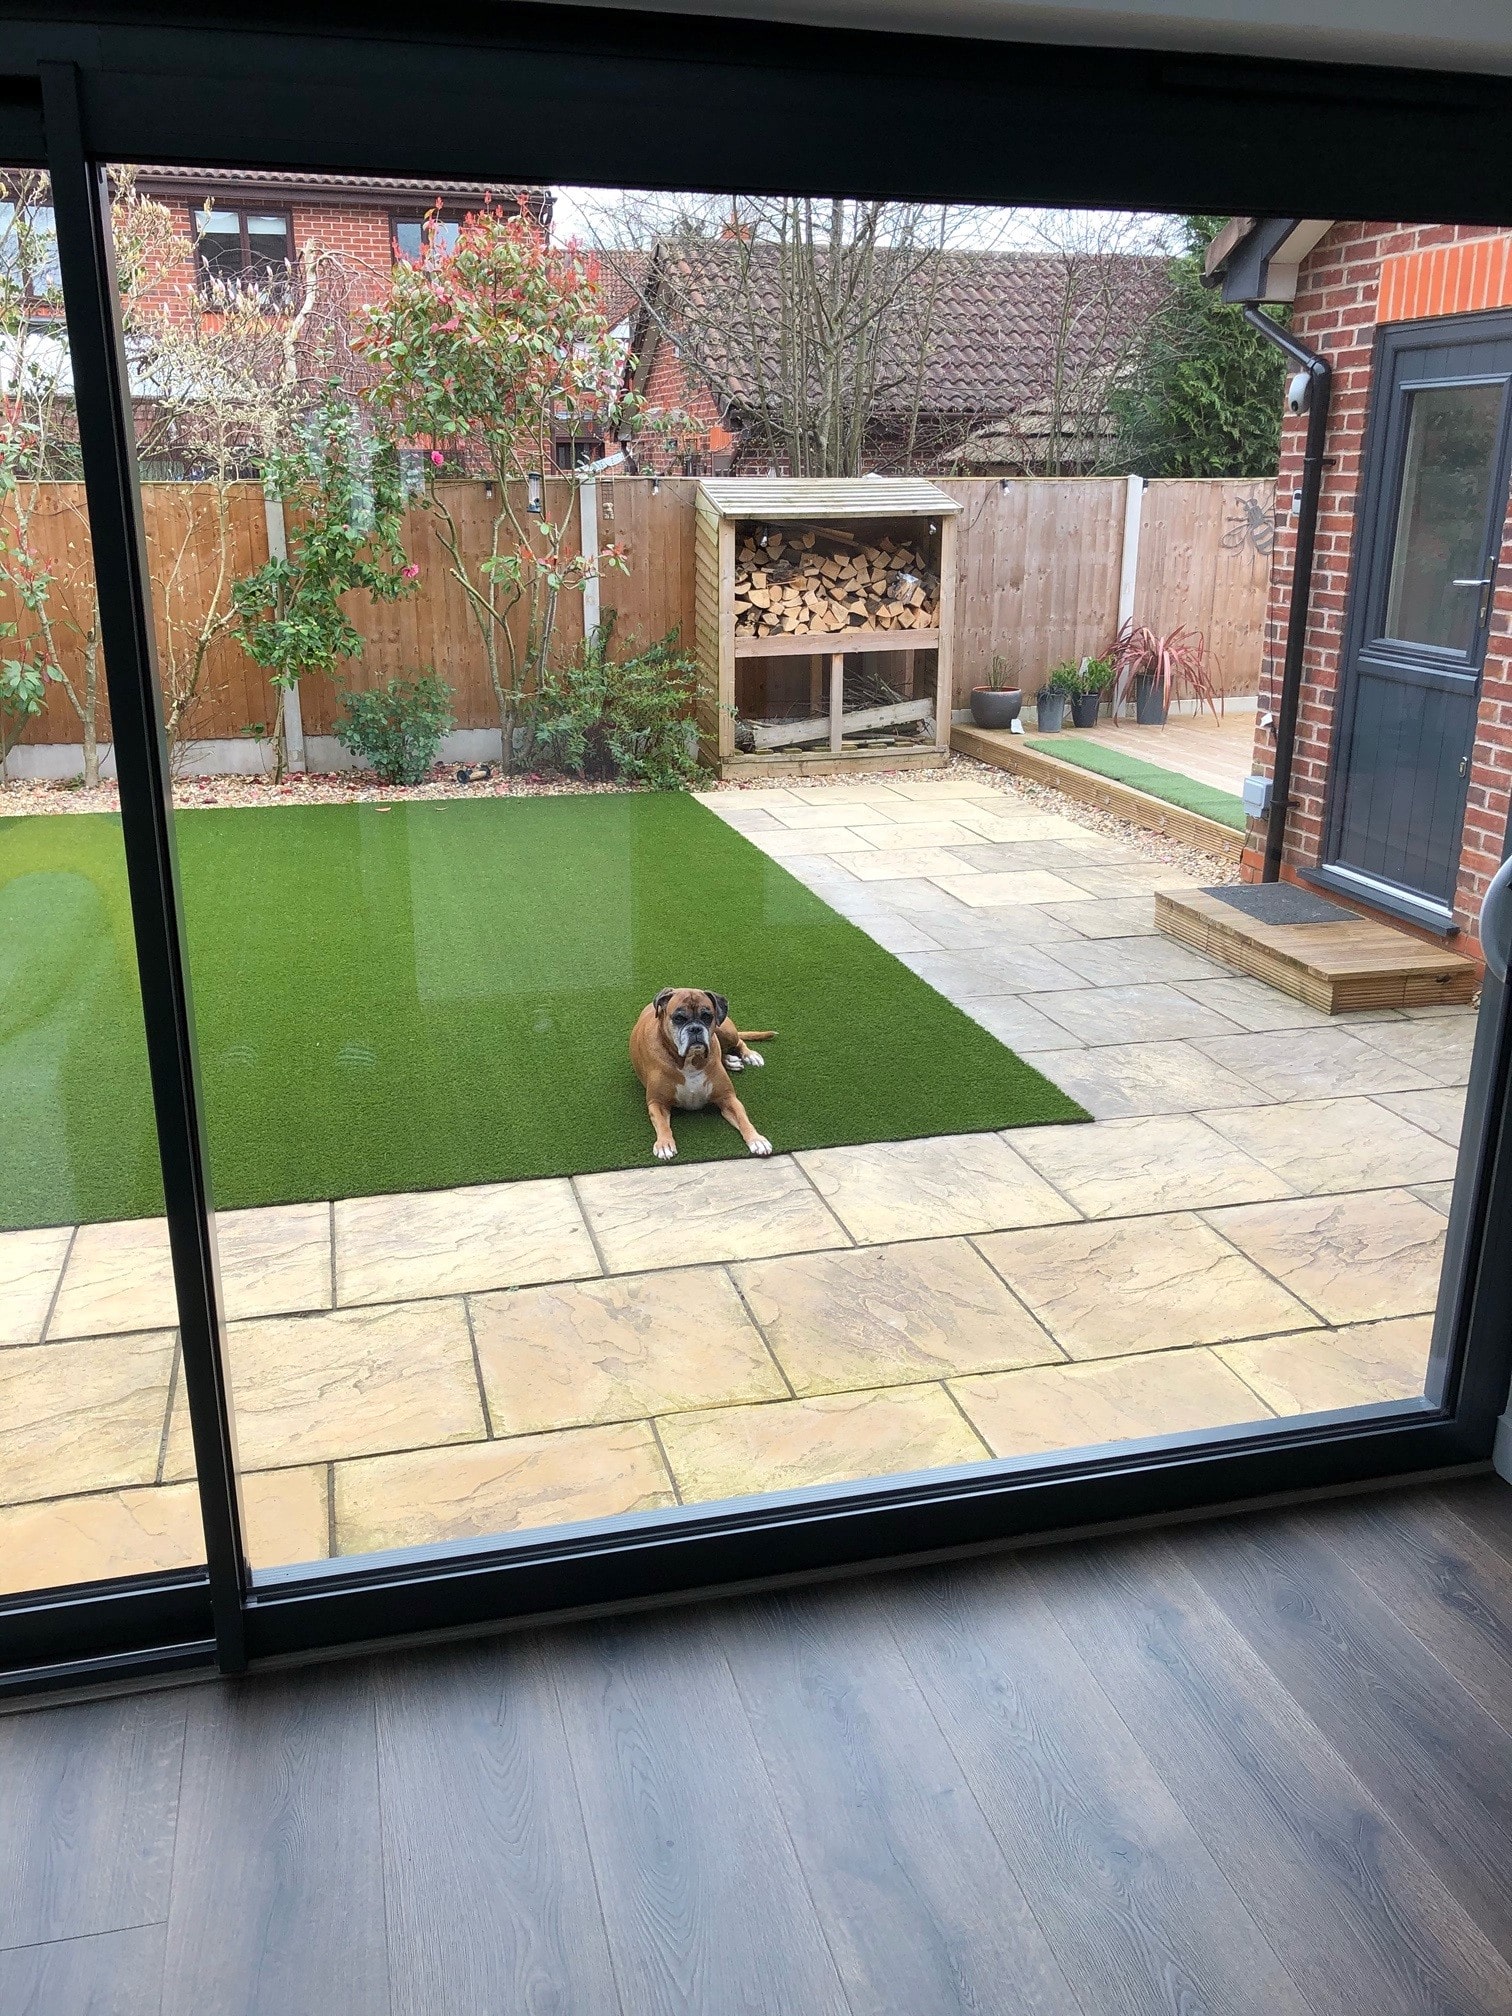 Photo of the back garden through the window with artificial grass and dogs there.